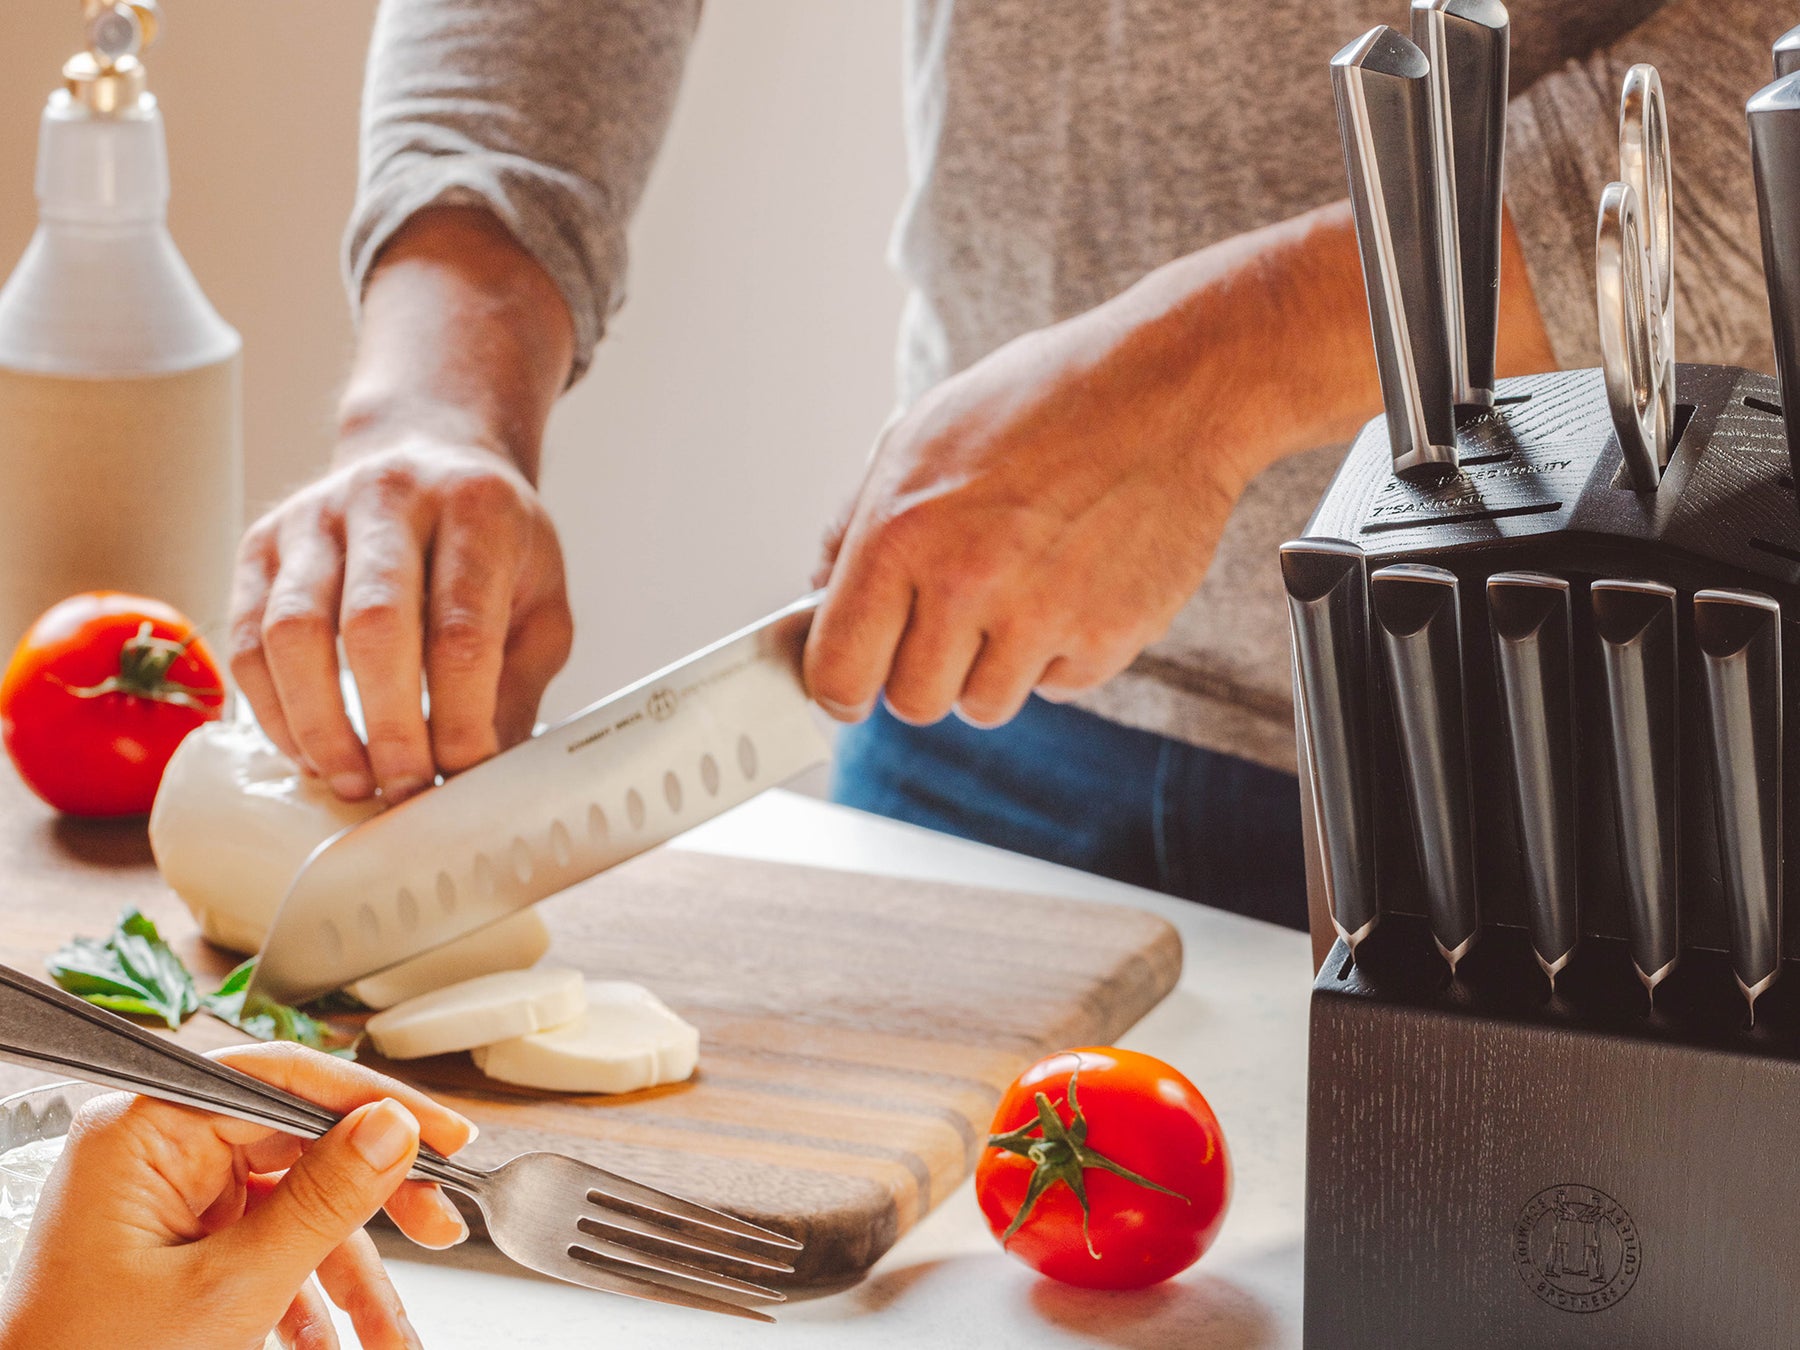 This 14-piece knife set with a built-in sharpener cuts everything